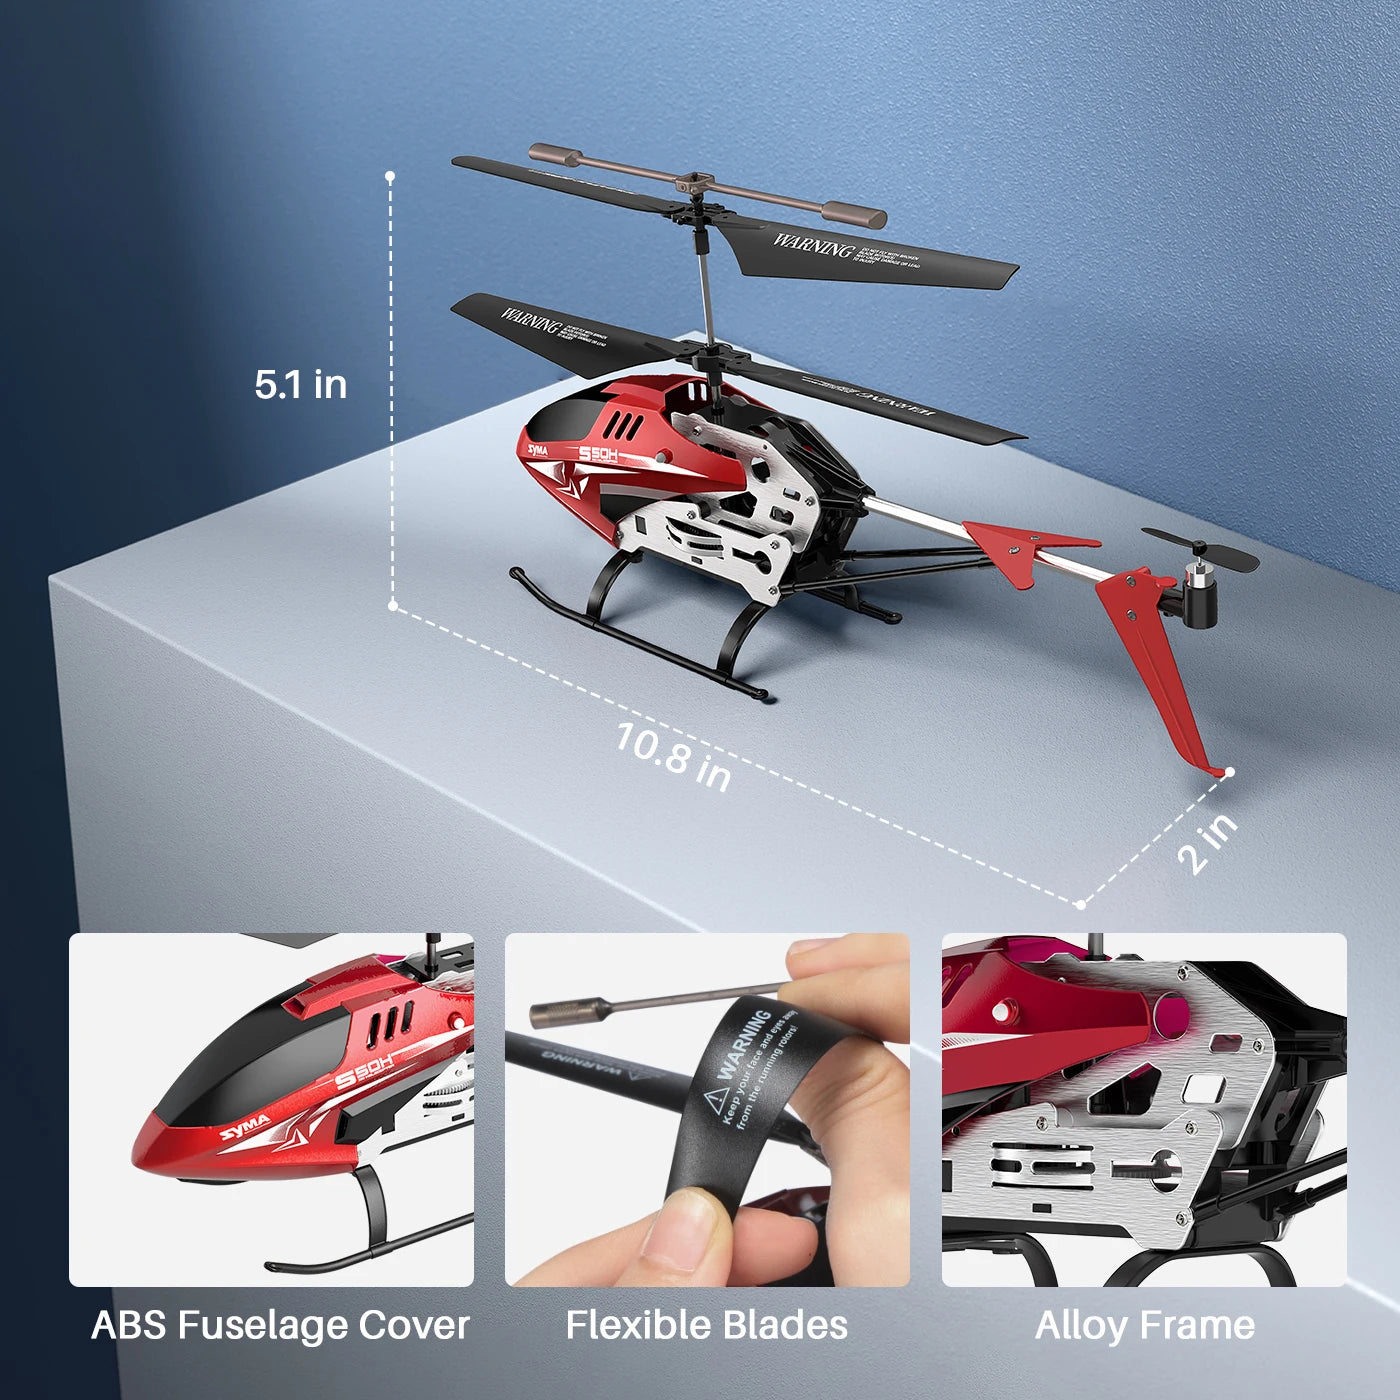 SYMA S50H RC Helicopter, toys for boys can hover on its own without controlling the throttle to maintain an altitude .